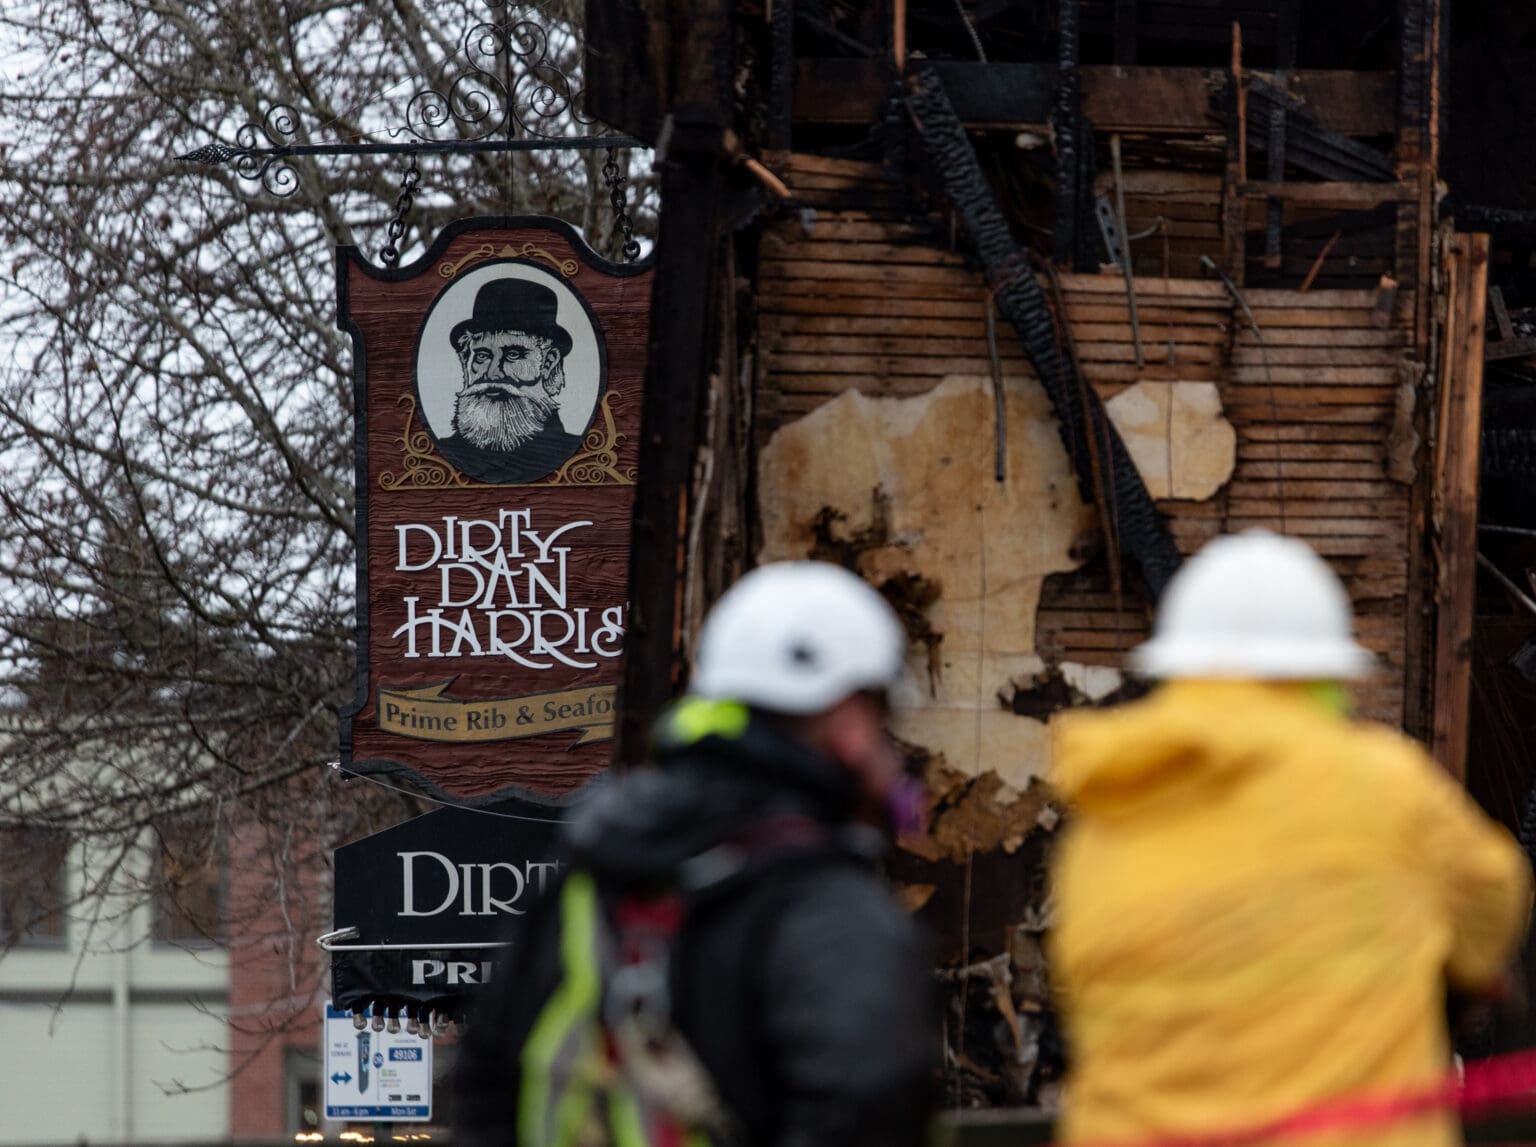 The sign for Dirty Dan Harris Steakhouse hangs in the background as a pair of construction workers inspect the burned and demolished parts of the building.